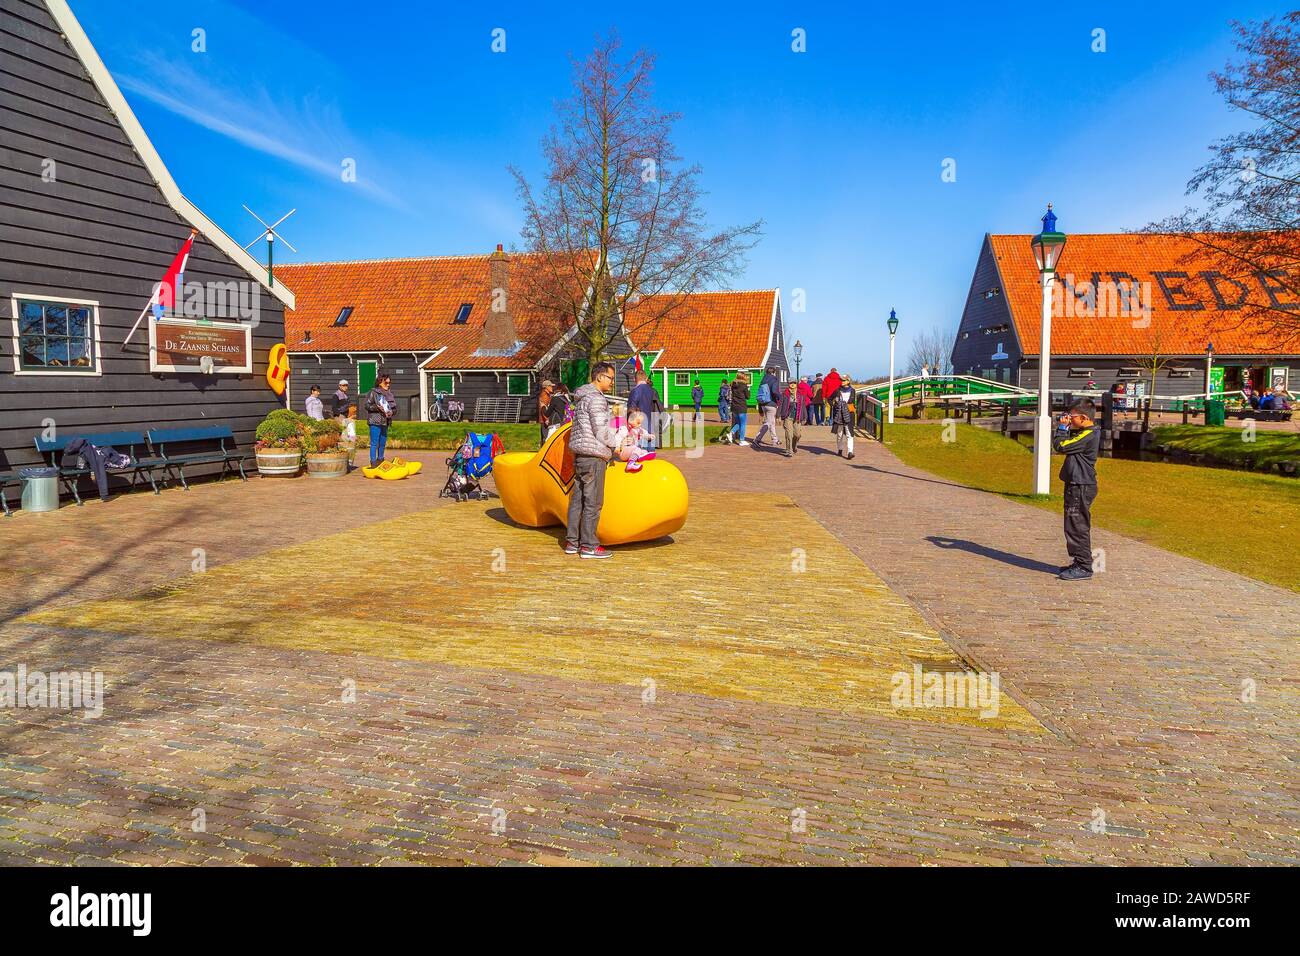 Zaanse schans, Netherlands - April 1, 2016: Large yellow wooden shoes, clogs or klompens for taking photo in Holland, people Stock Photo